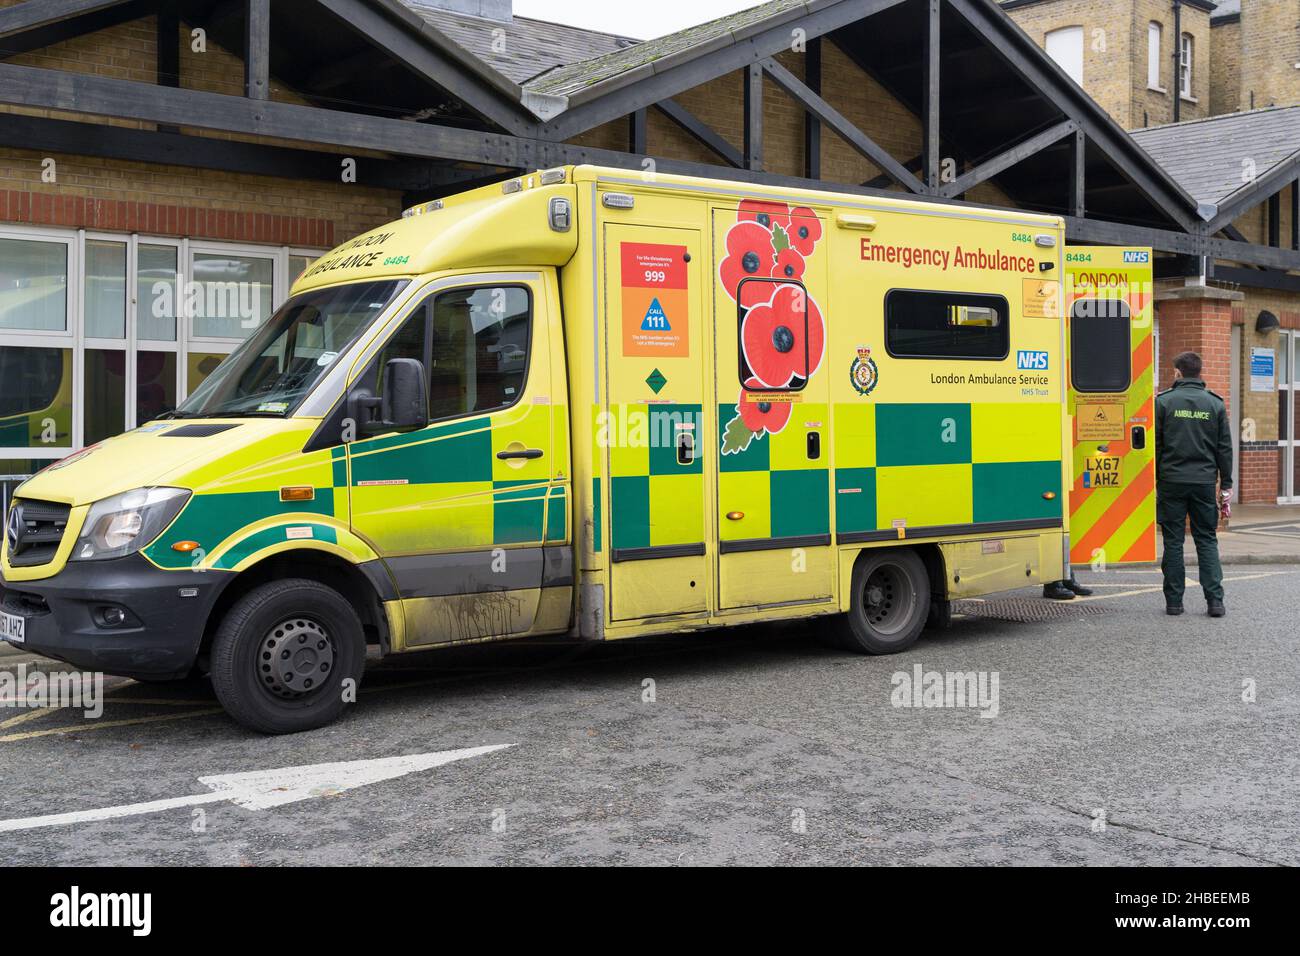 Lewisham London, UK. 19th Dec, 2021. London Ambulances are busying responding to emergency calls taking patients into University Hospital Lewisham for further treatments during winter flu and Omicron surging season across England. Credit: xiu bao/Alamy Live News Stock Photo